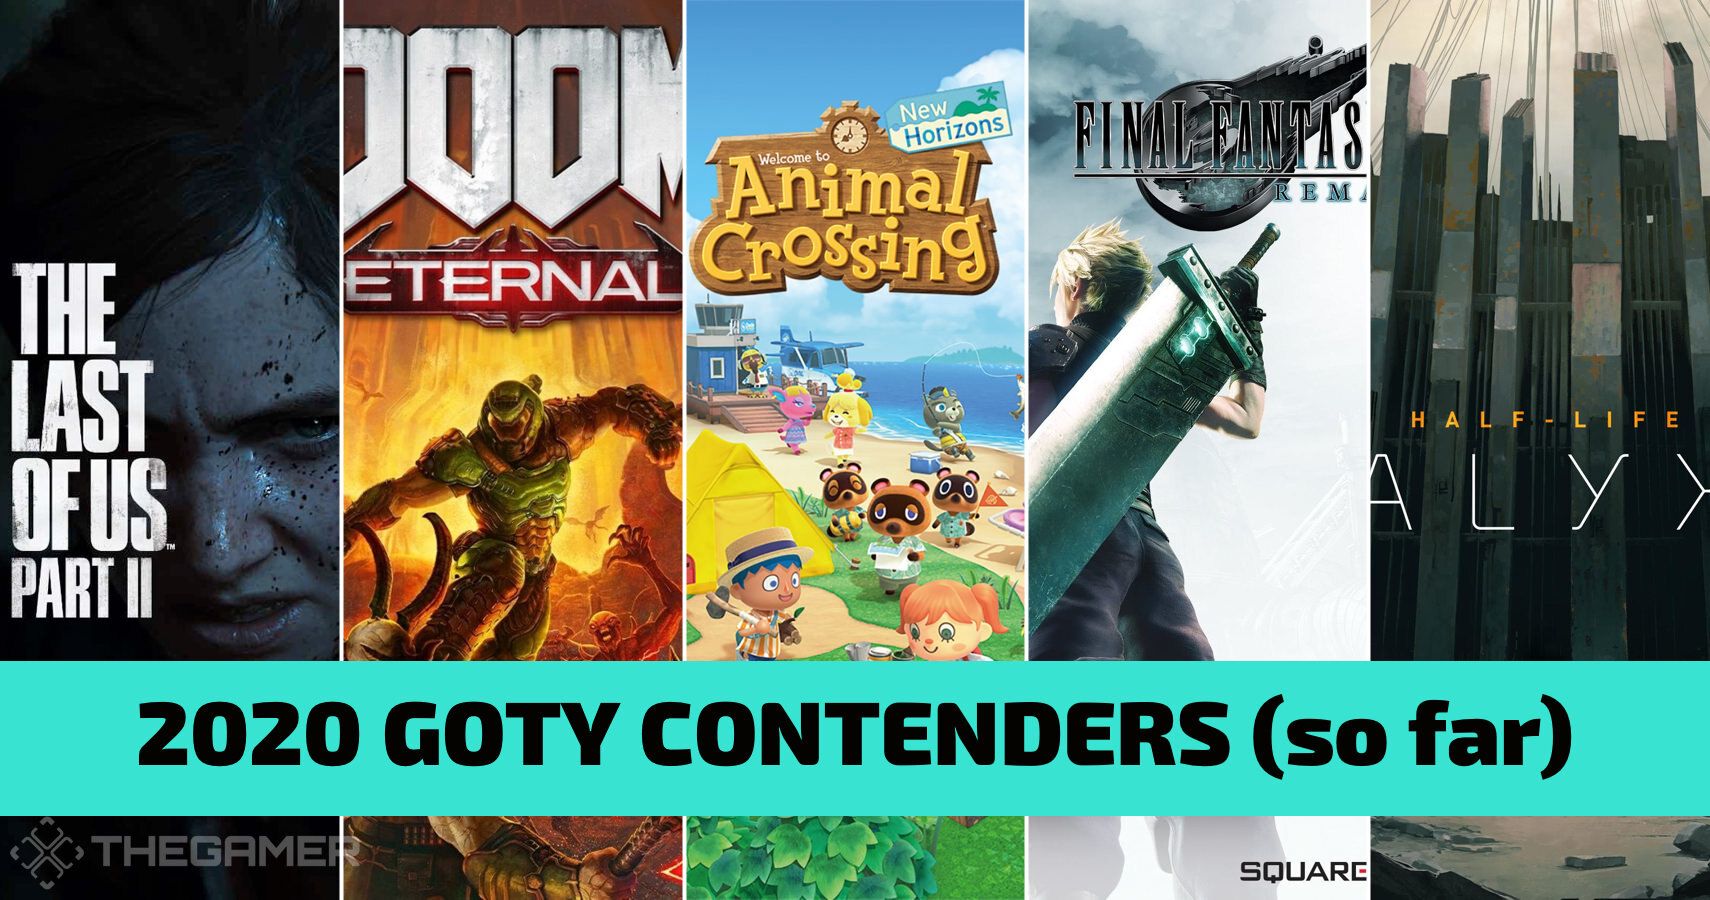 These Are 2020’s GOTY Contenders (So Far)